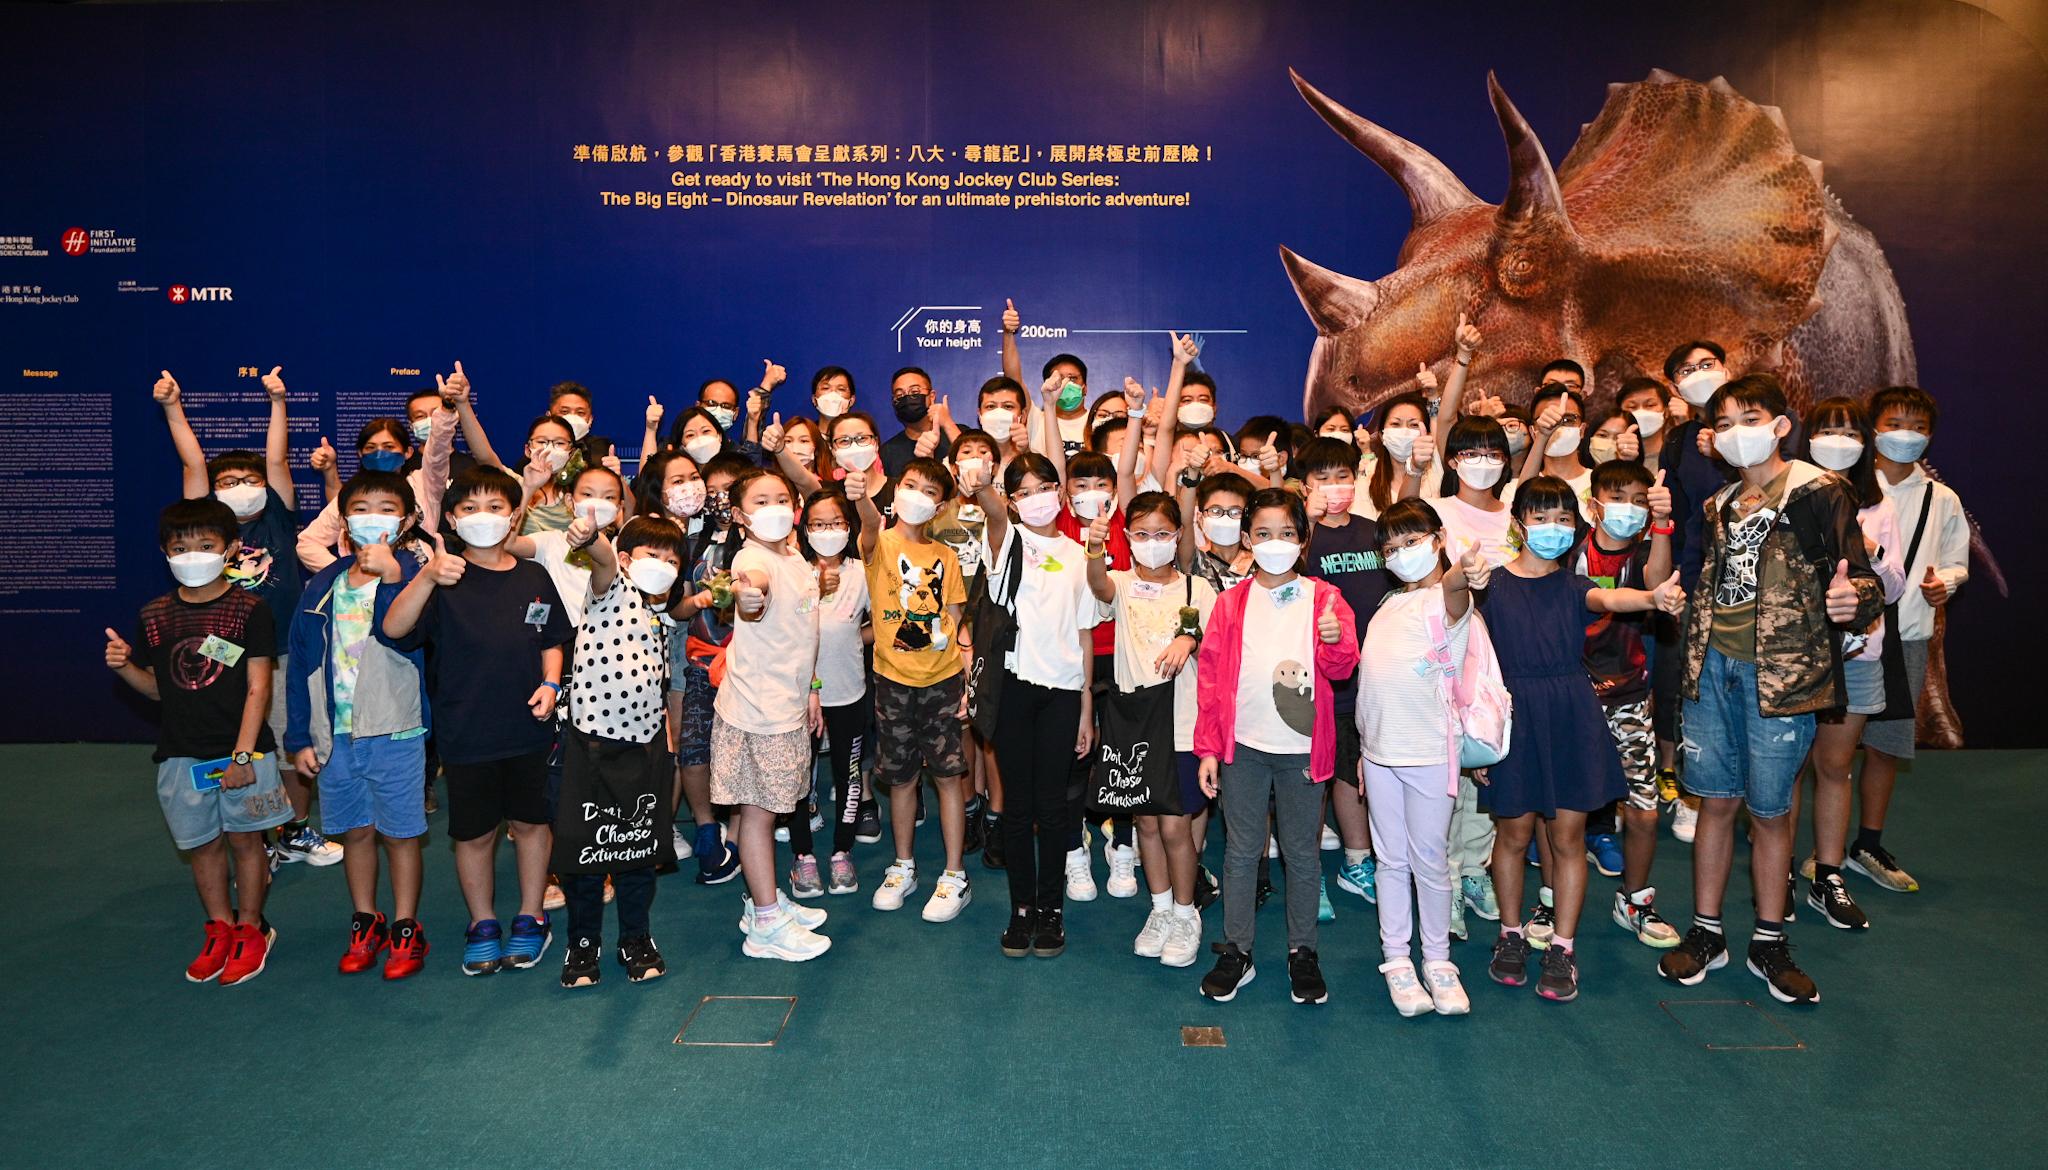 The Hong Kong Science Museum held the first session of "A Night with Dinosaurs" sleepover programme last night (August 5). Thirty groups of participants experienced a unique night at the dinosaur-packed museum.